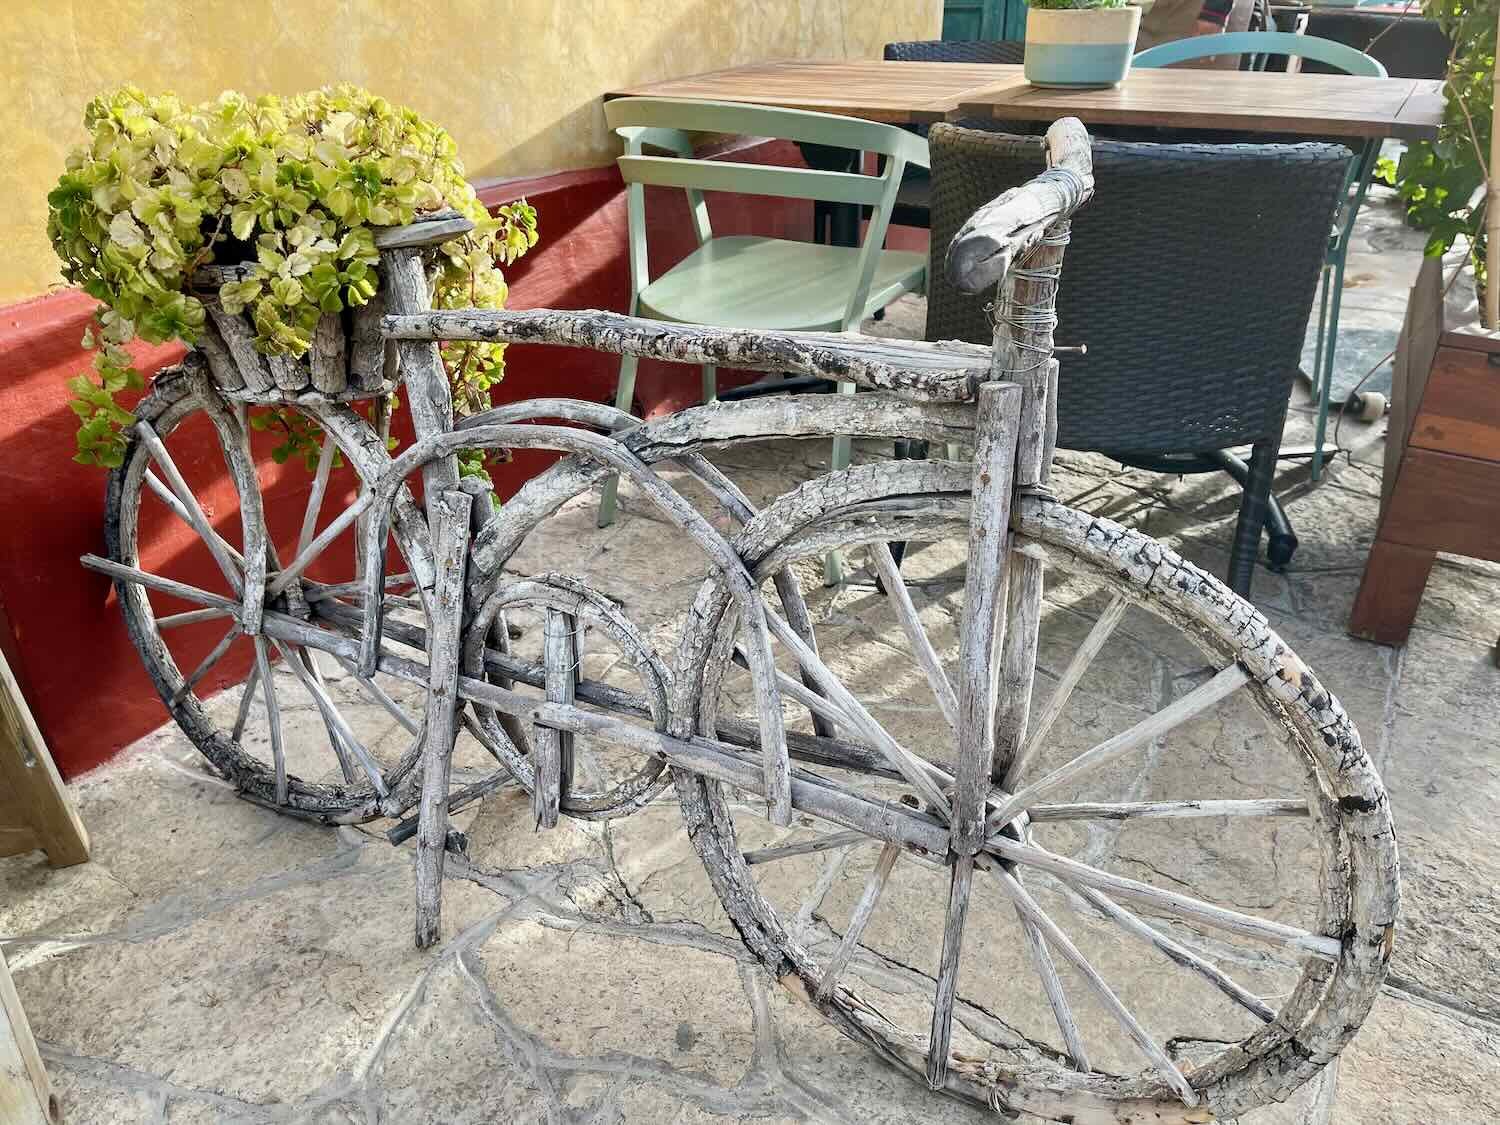 A wooden bicycle on display at an outdoor cafe